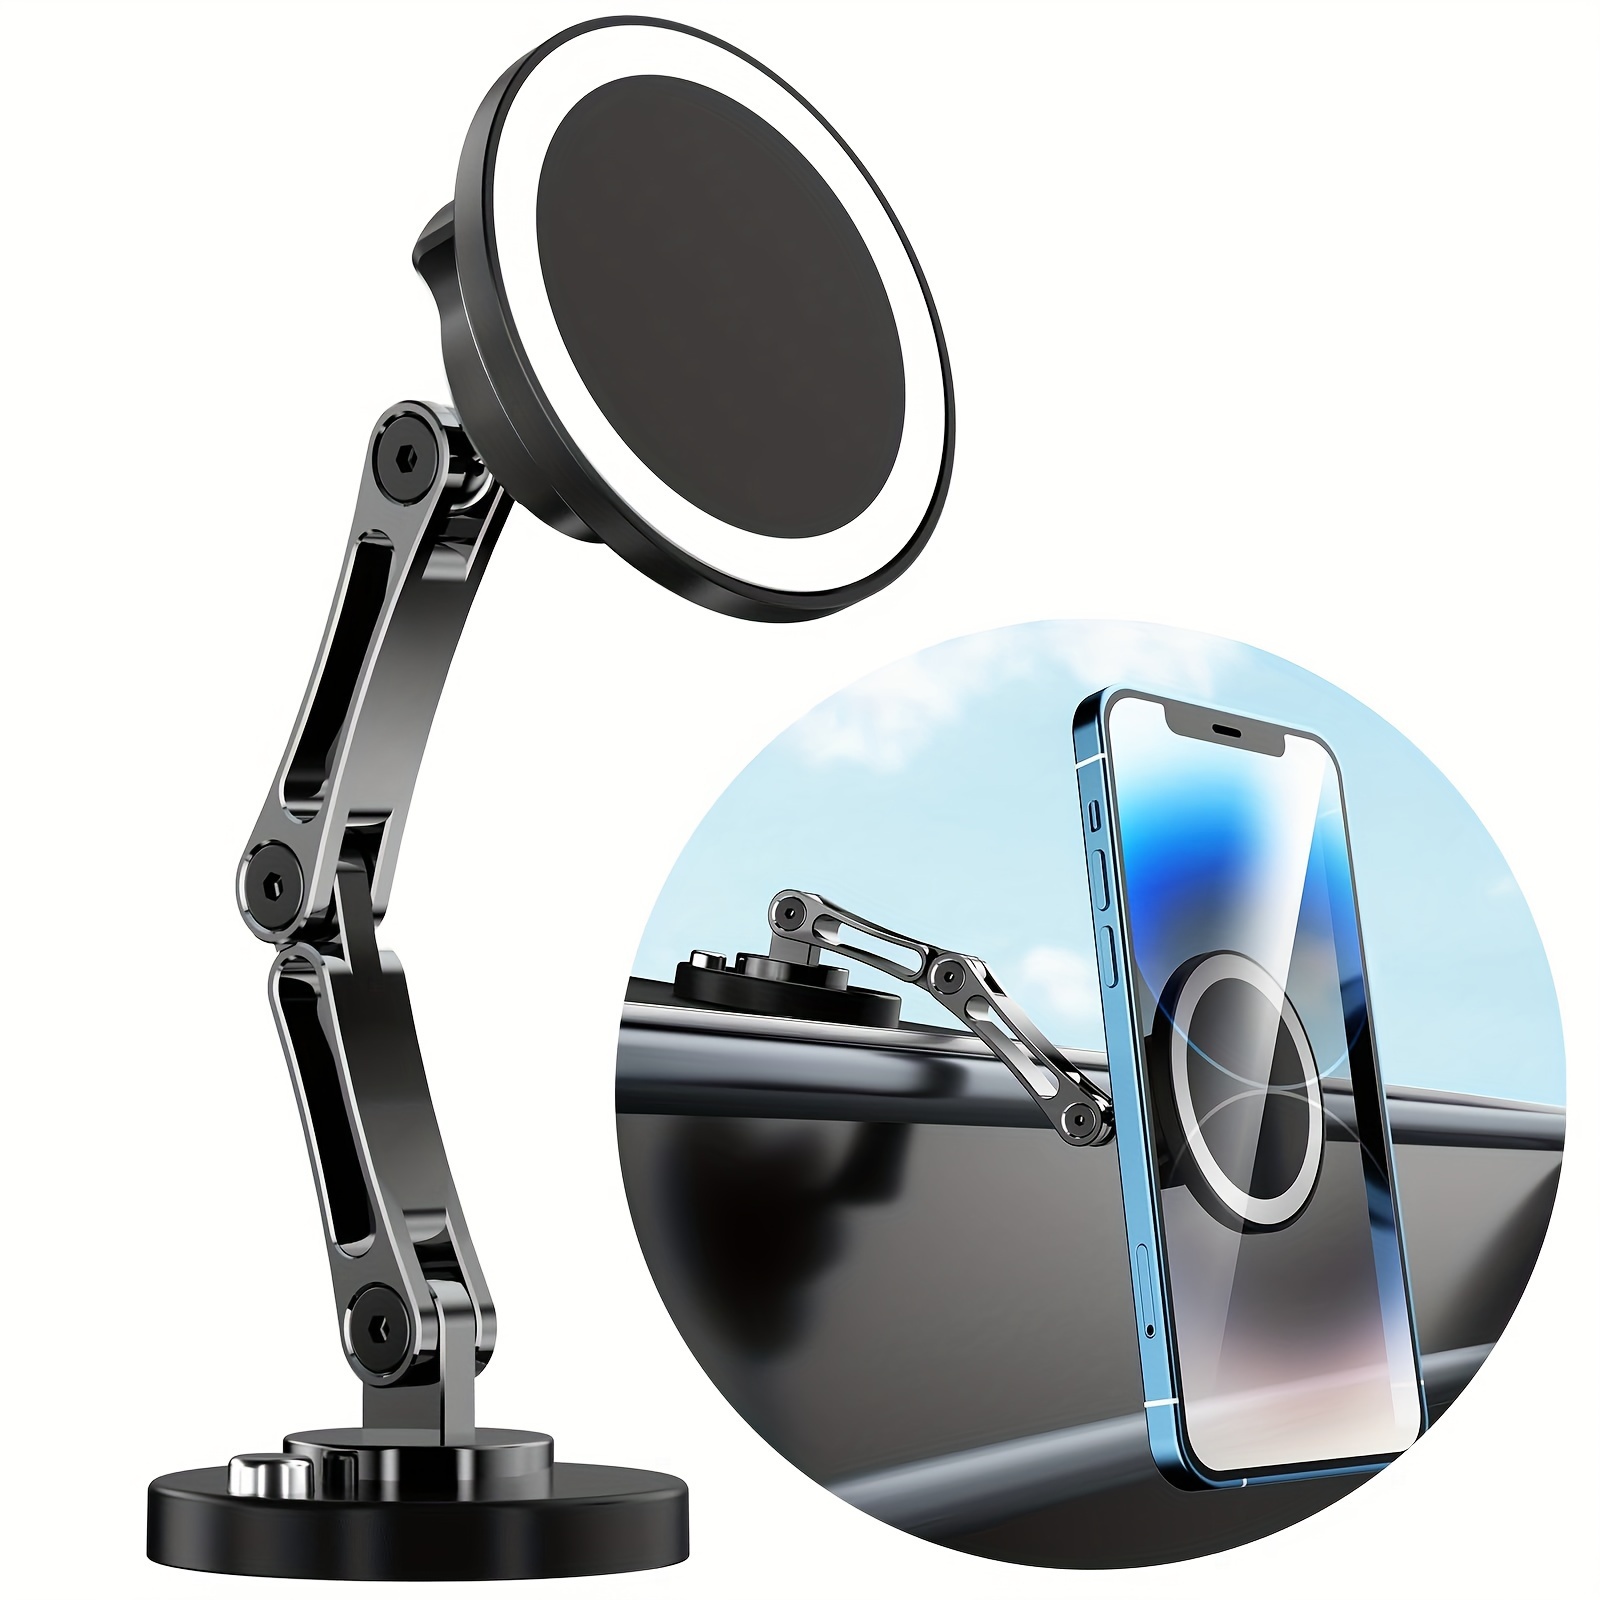 

Fit For Magsafe Car Mount Long Adjustable Arm Magnetic Phone Holder For Car 360° Rotation Magnetic Car Phone Holder For Dashboard Cell Phone Mount For 15 14 13 12 Pro Max All Phones